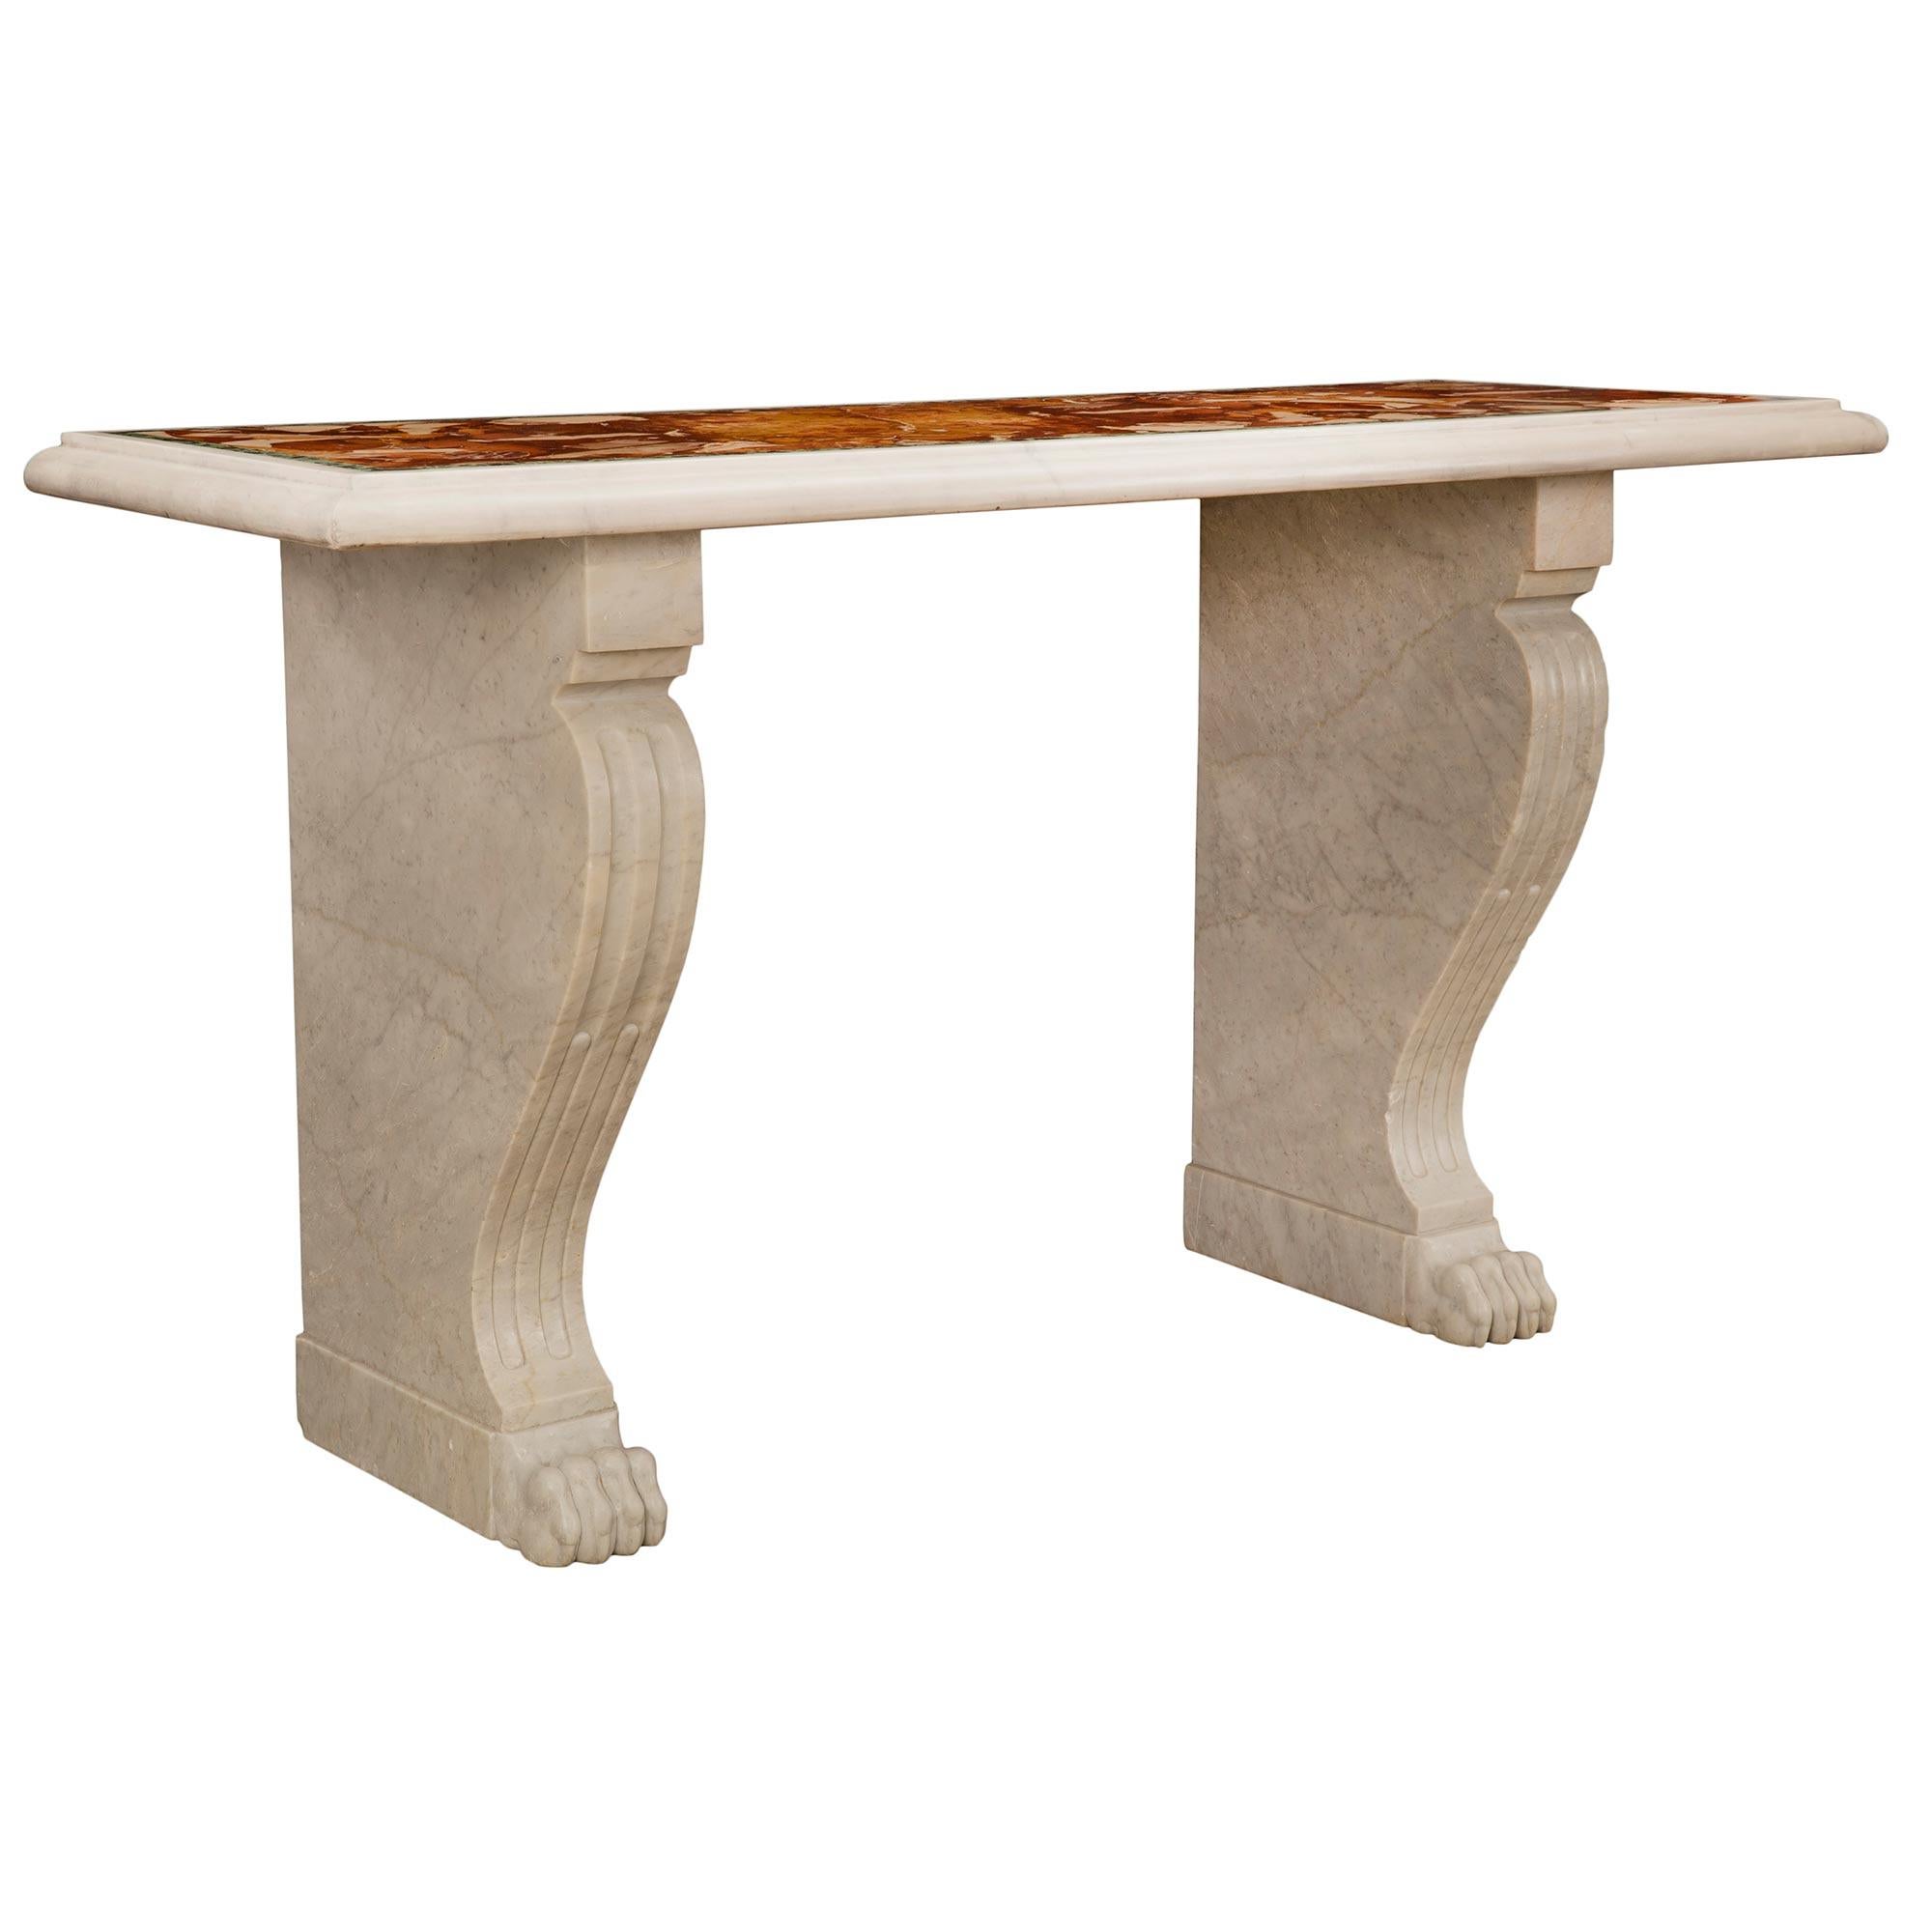 Italian 19th Century Neoclassical Style Marble Freestanding Console For Sale 1